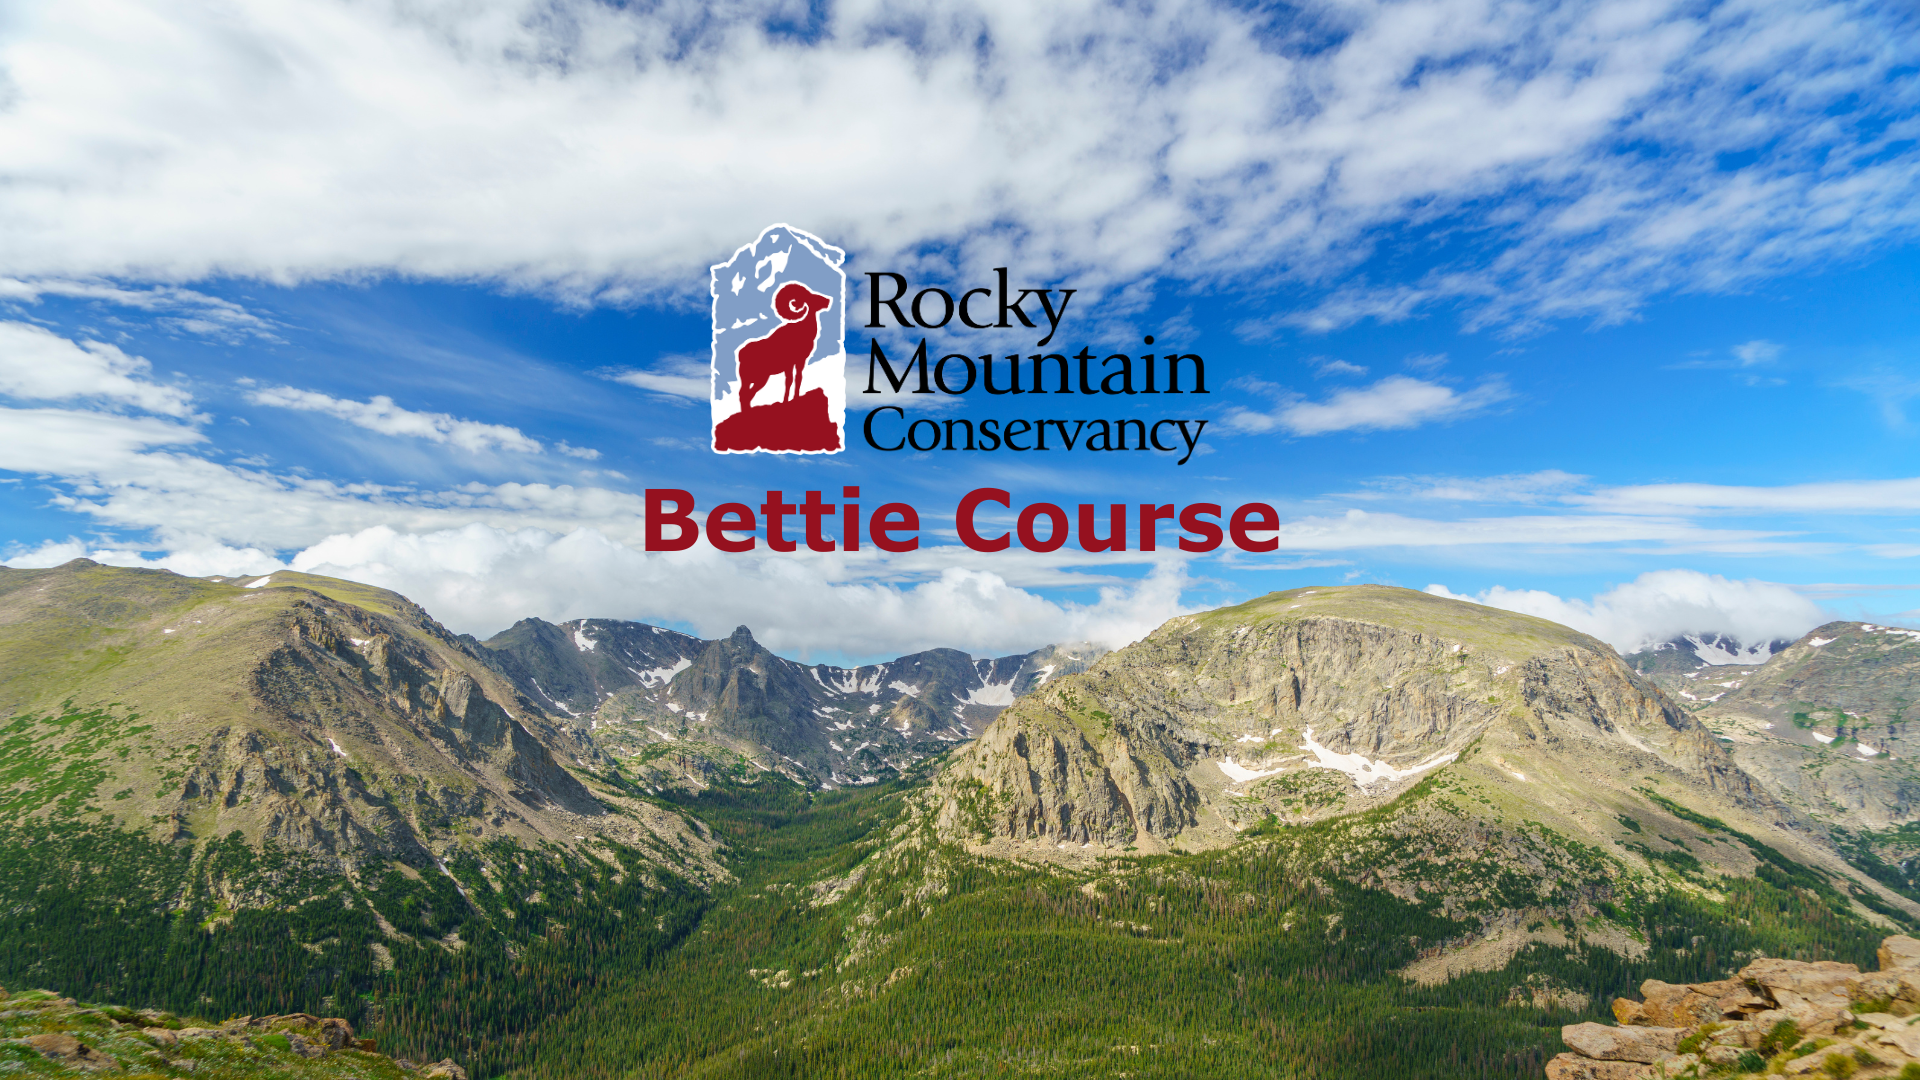 Landscape photograph showing blue sky with scattered clouds, rocky mountains, and grassy meadows across a wide valley. The image is overlain by the Rocky Mountain Conservancy logo and the words, Bettie Course.